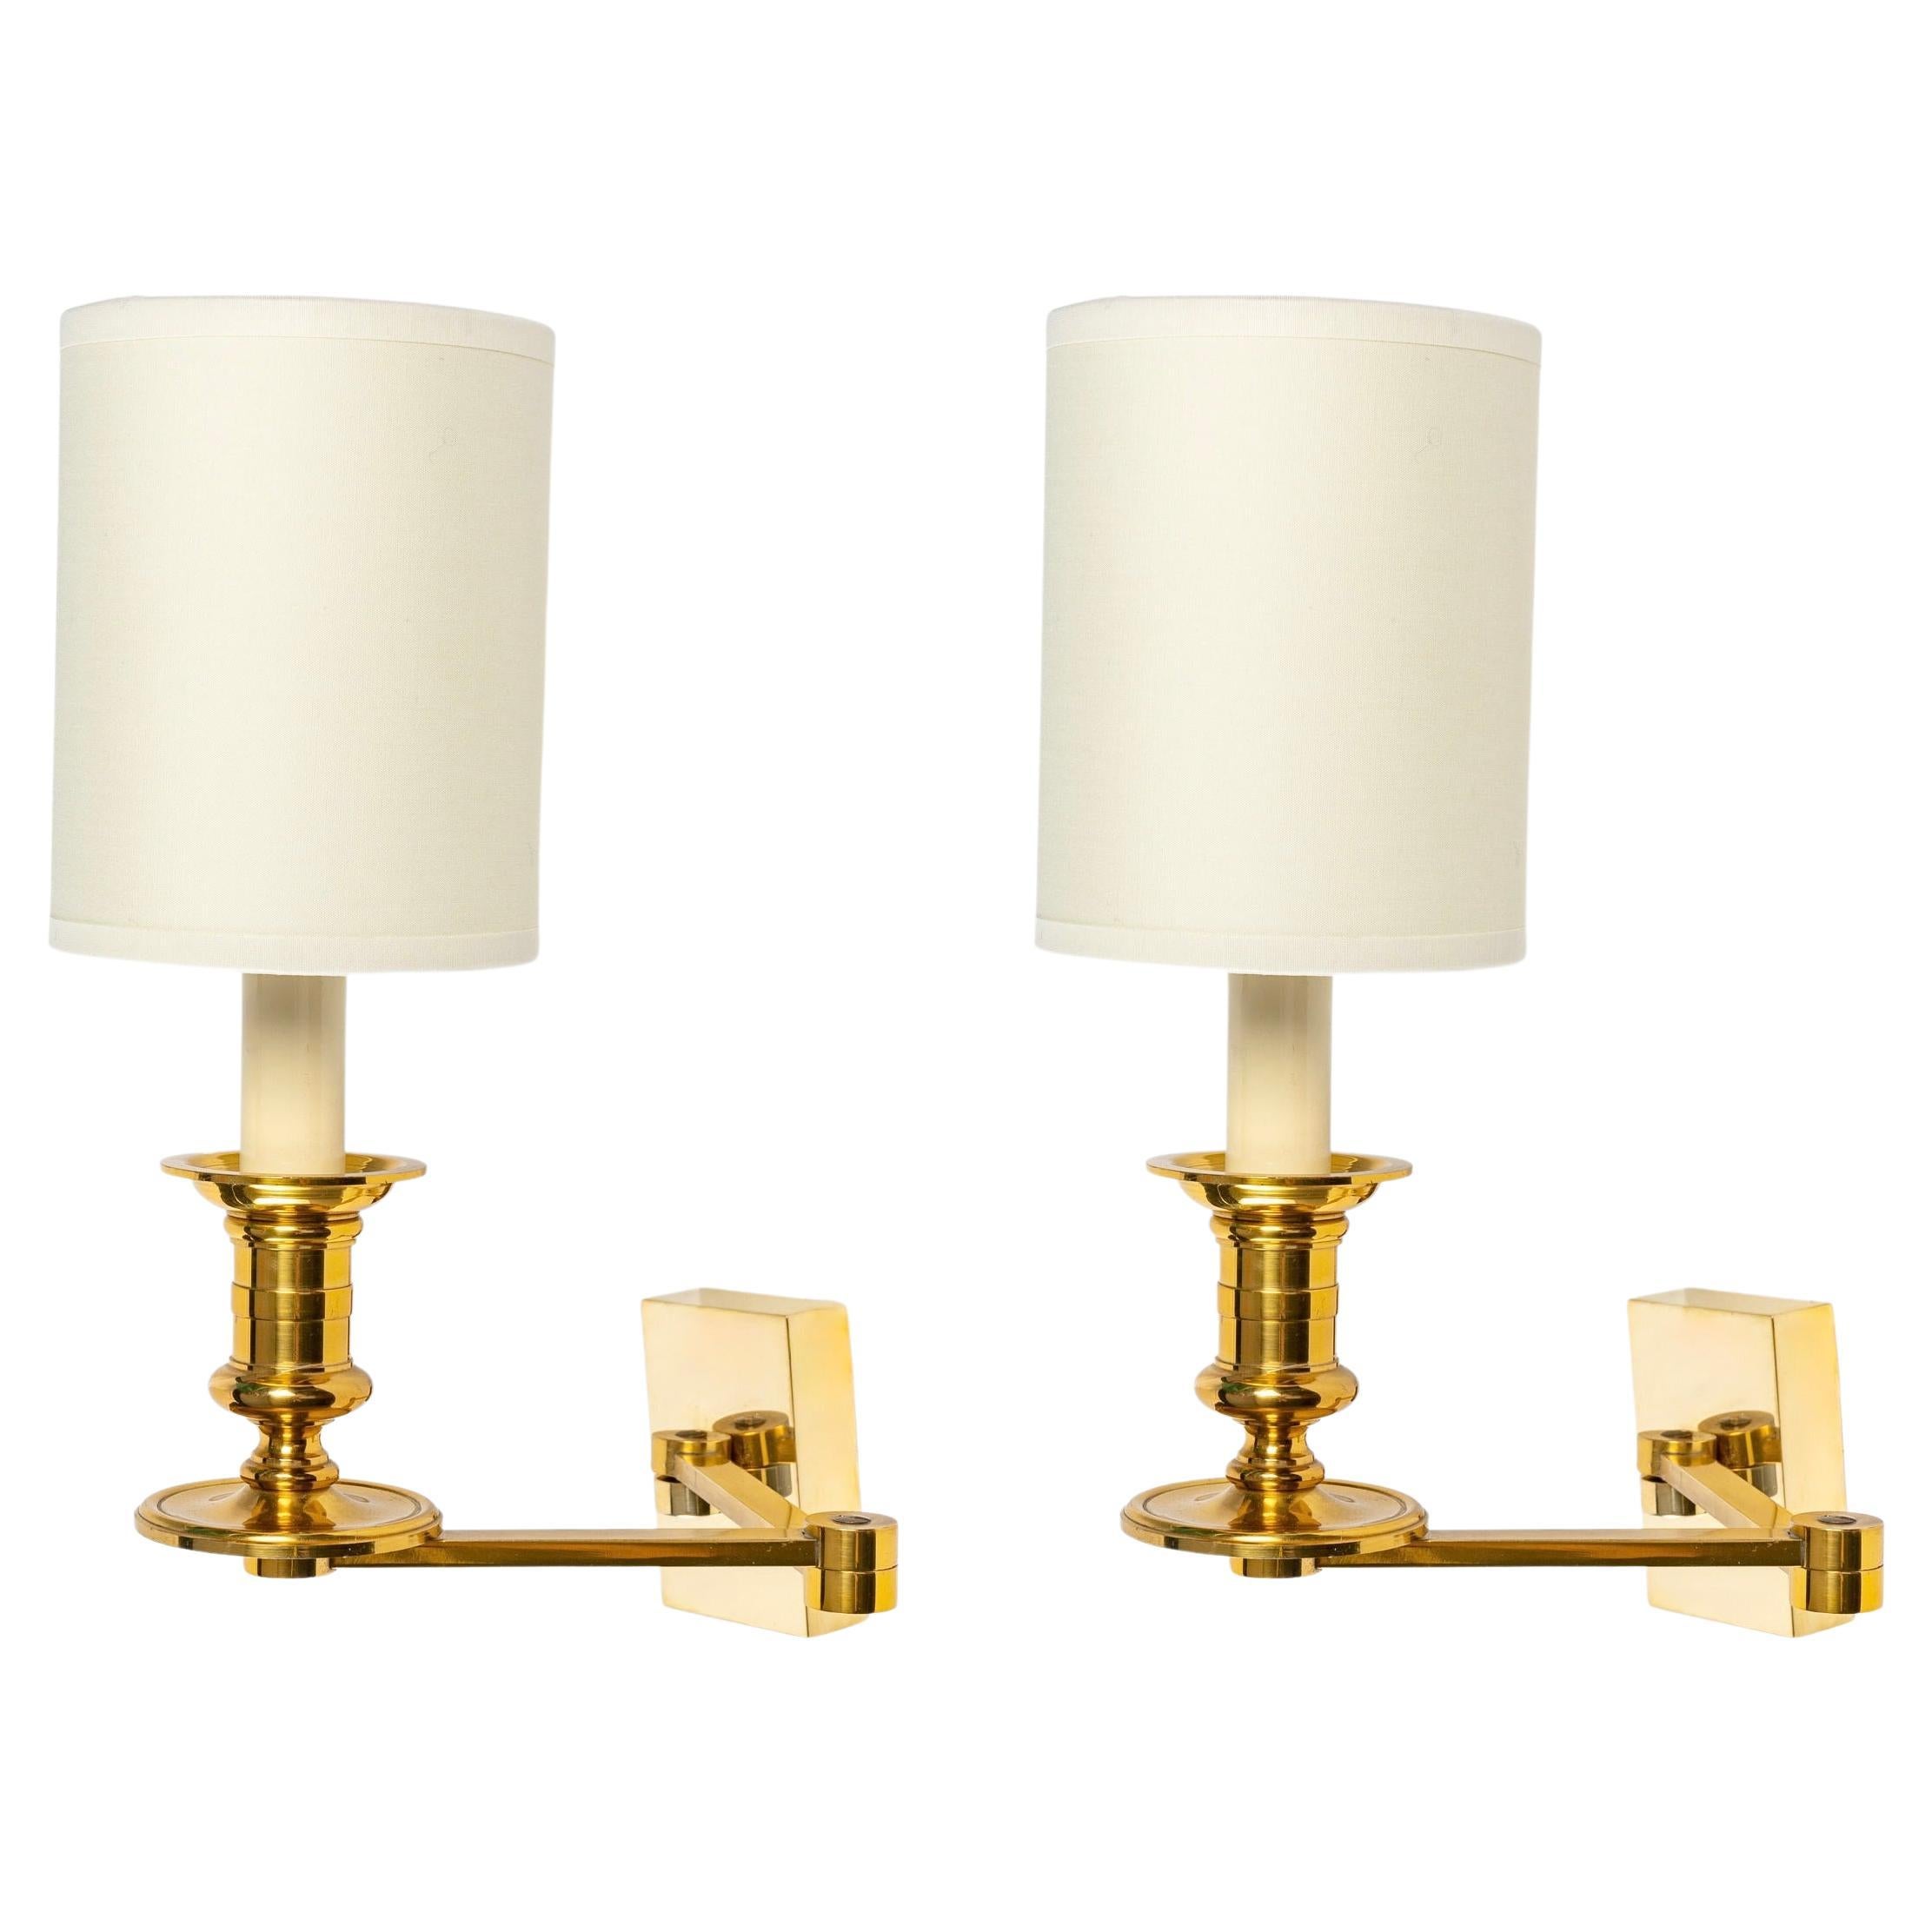 1960, Pair of Sconces with Pivoting Arm in Gilded Bronze by Maison Jansen